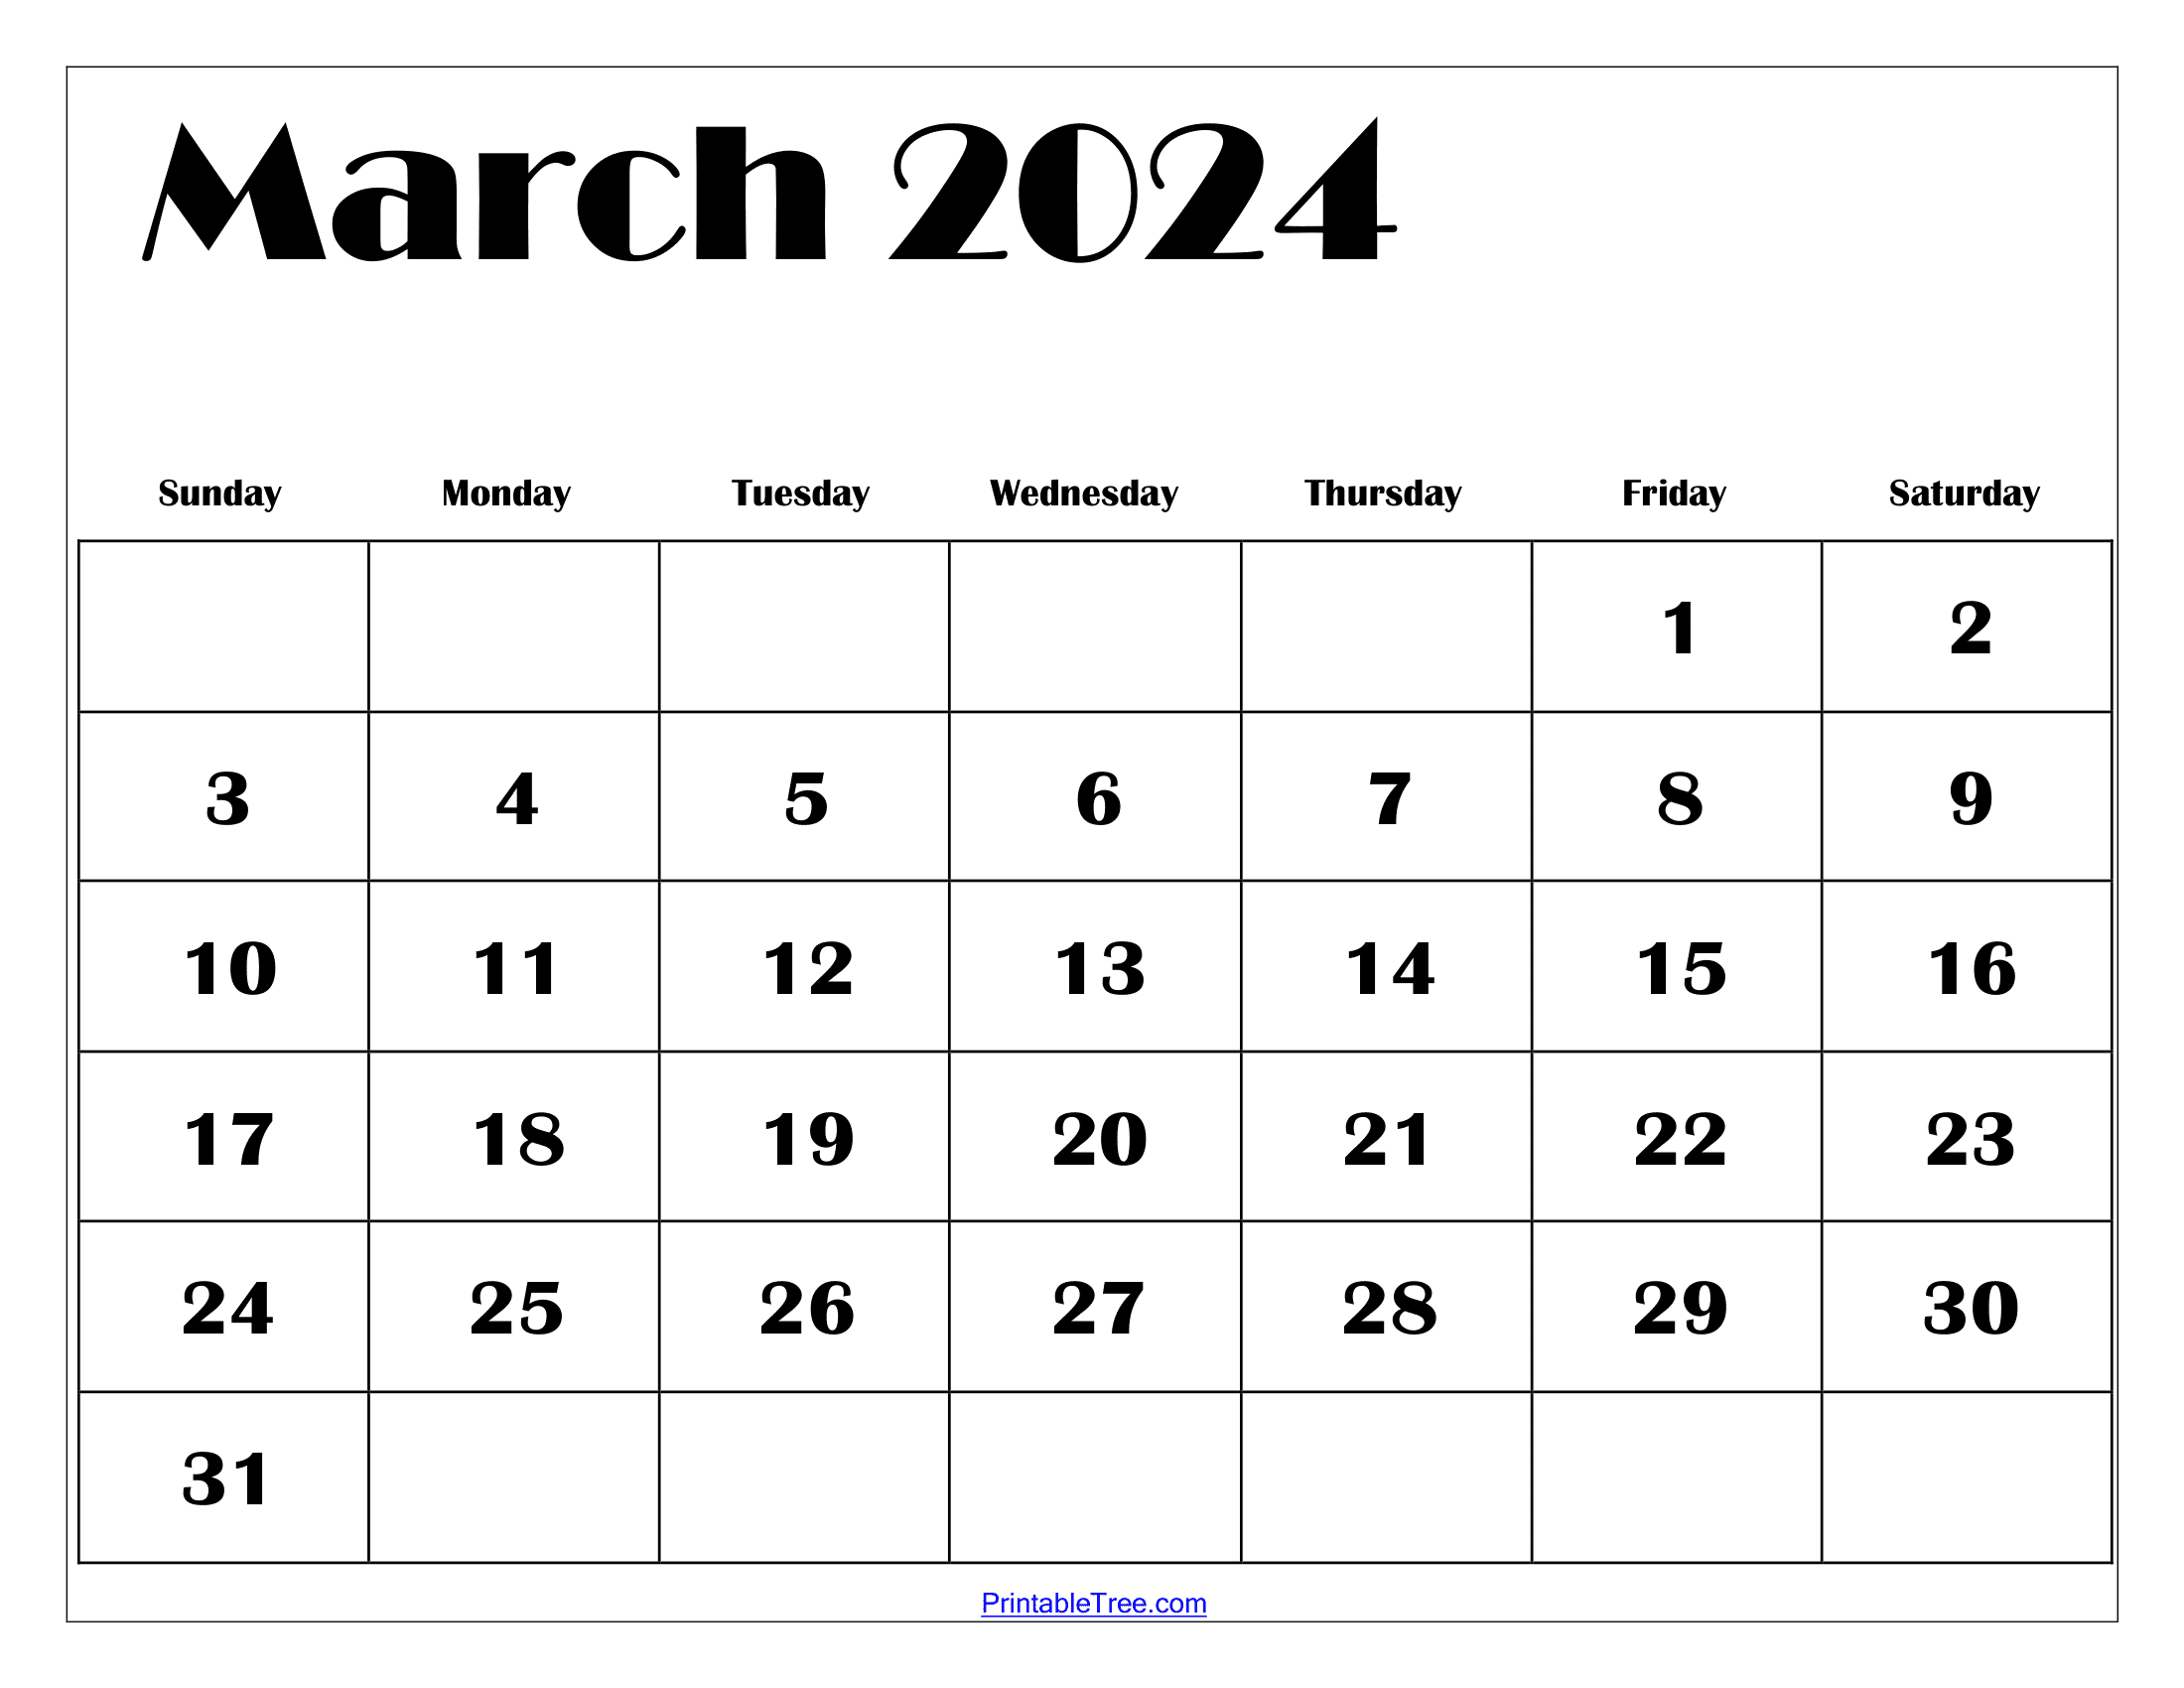 March 2024 Calendar Printable Pdf With Holidays Template Free for Free Printable Calendar For March 2024